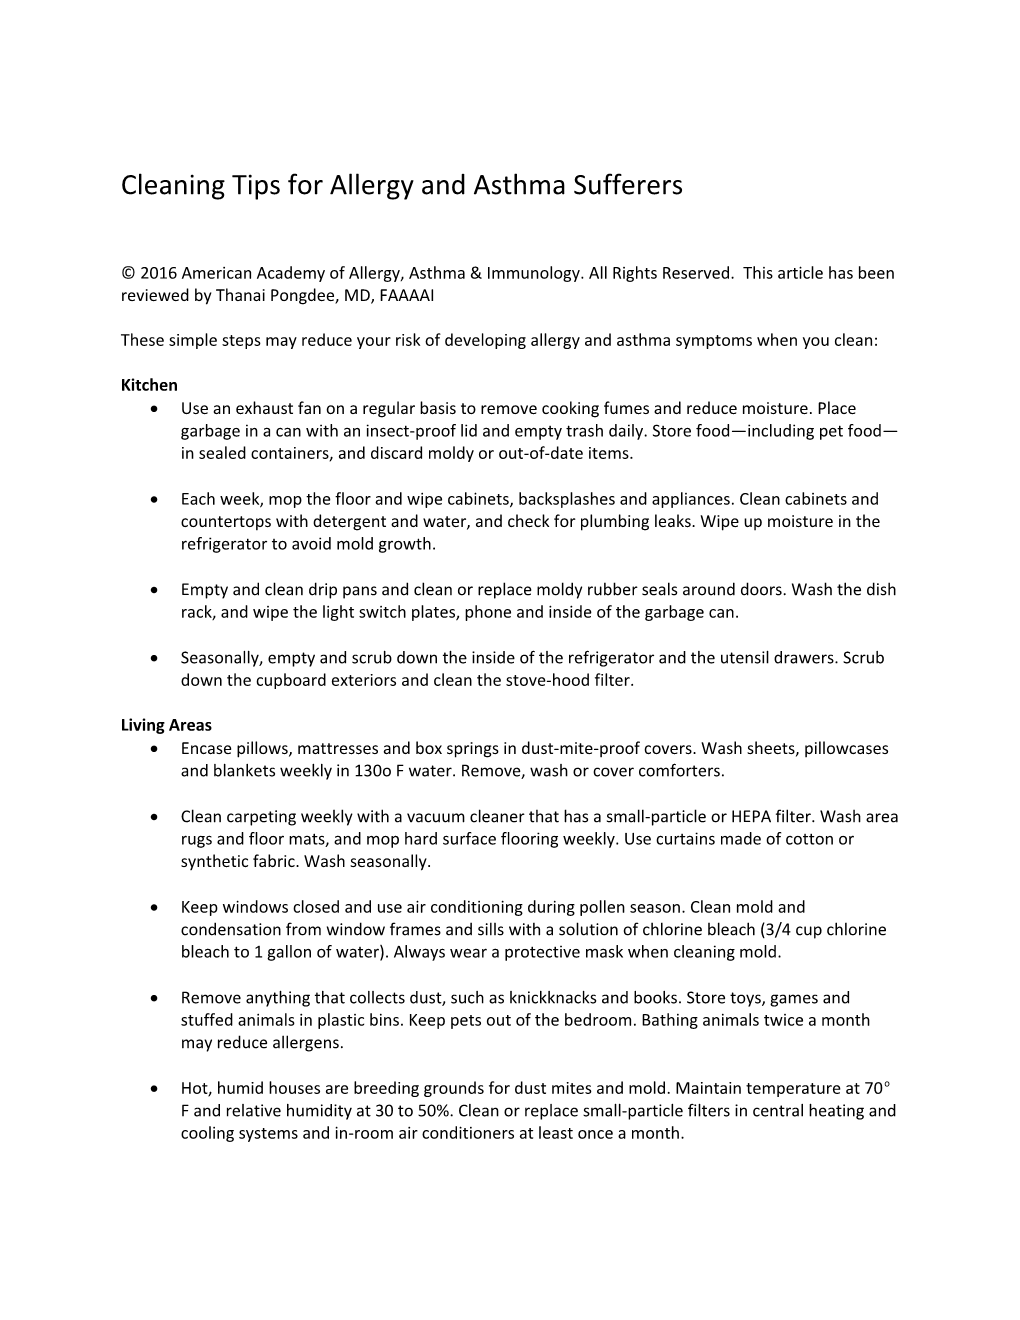 Cleaning Tips for Allergy and Asthma Sufferers